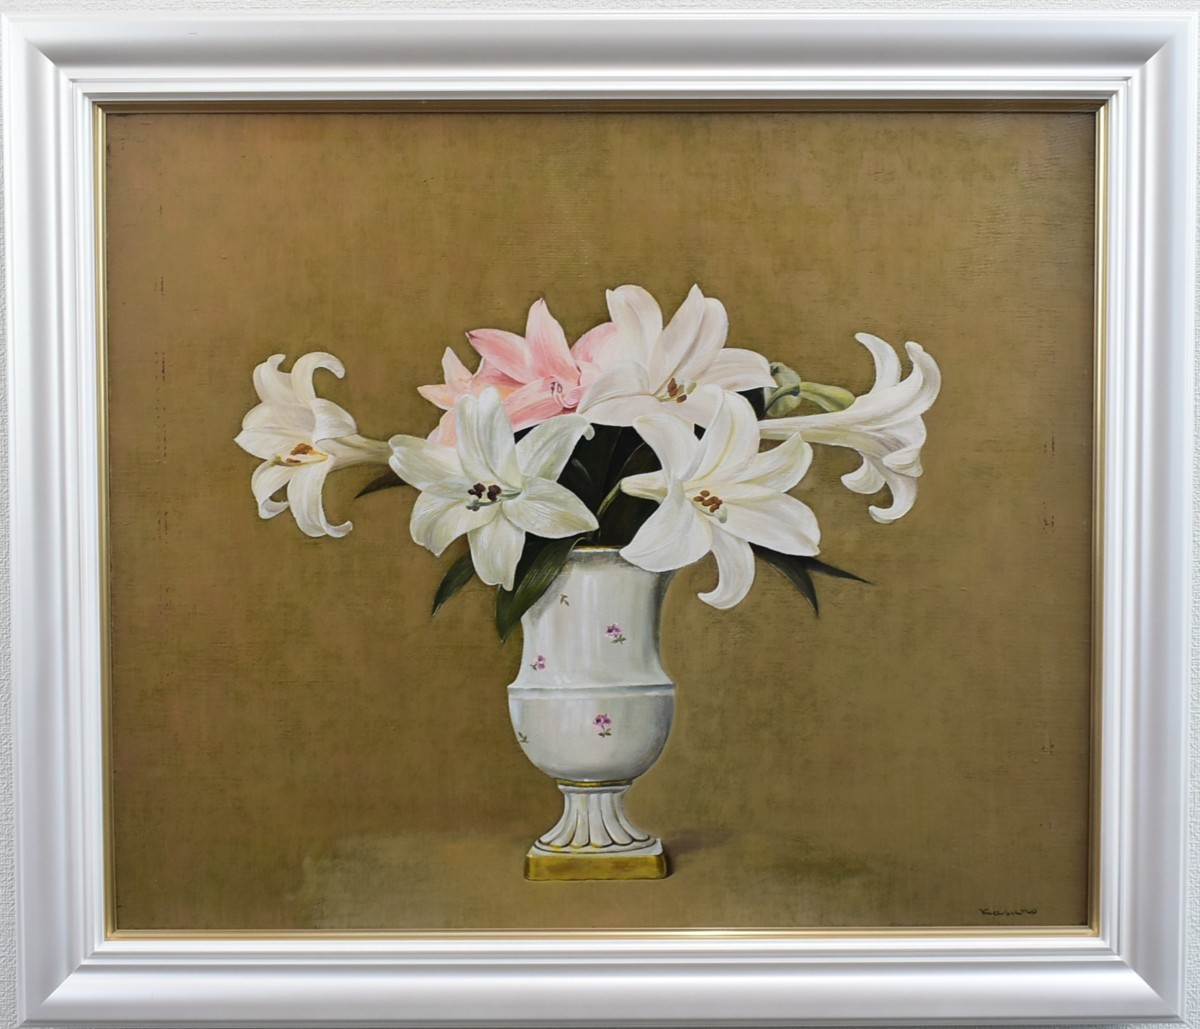 Katsumi Kasuno, No. 20 Lily [Masami Gallery, 5, 000 pieces on display, you're sure to find one you like], Painting, Oil painting, Still life